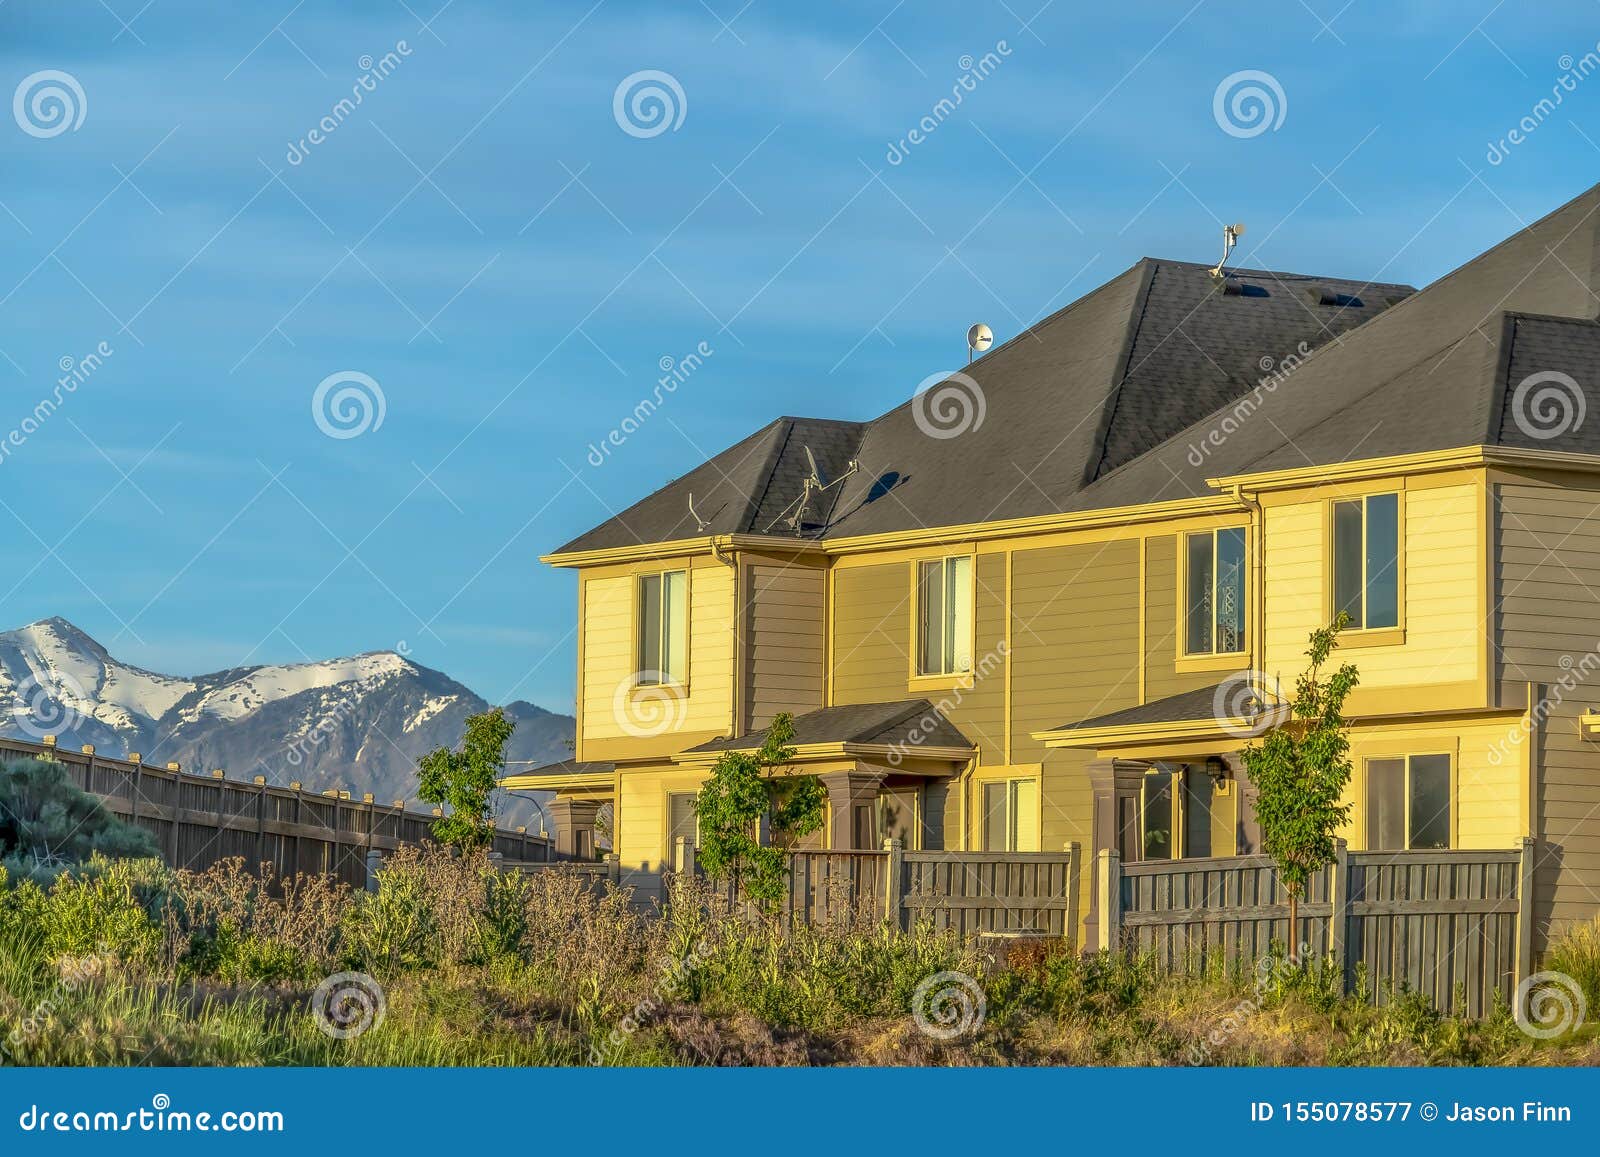 Home With Wooden Fence And View Of Snowy Mountain Peak Against Blue Sky